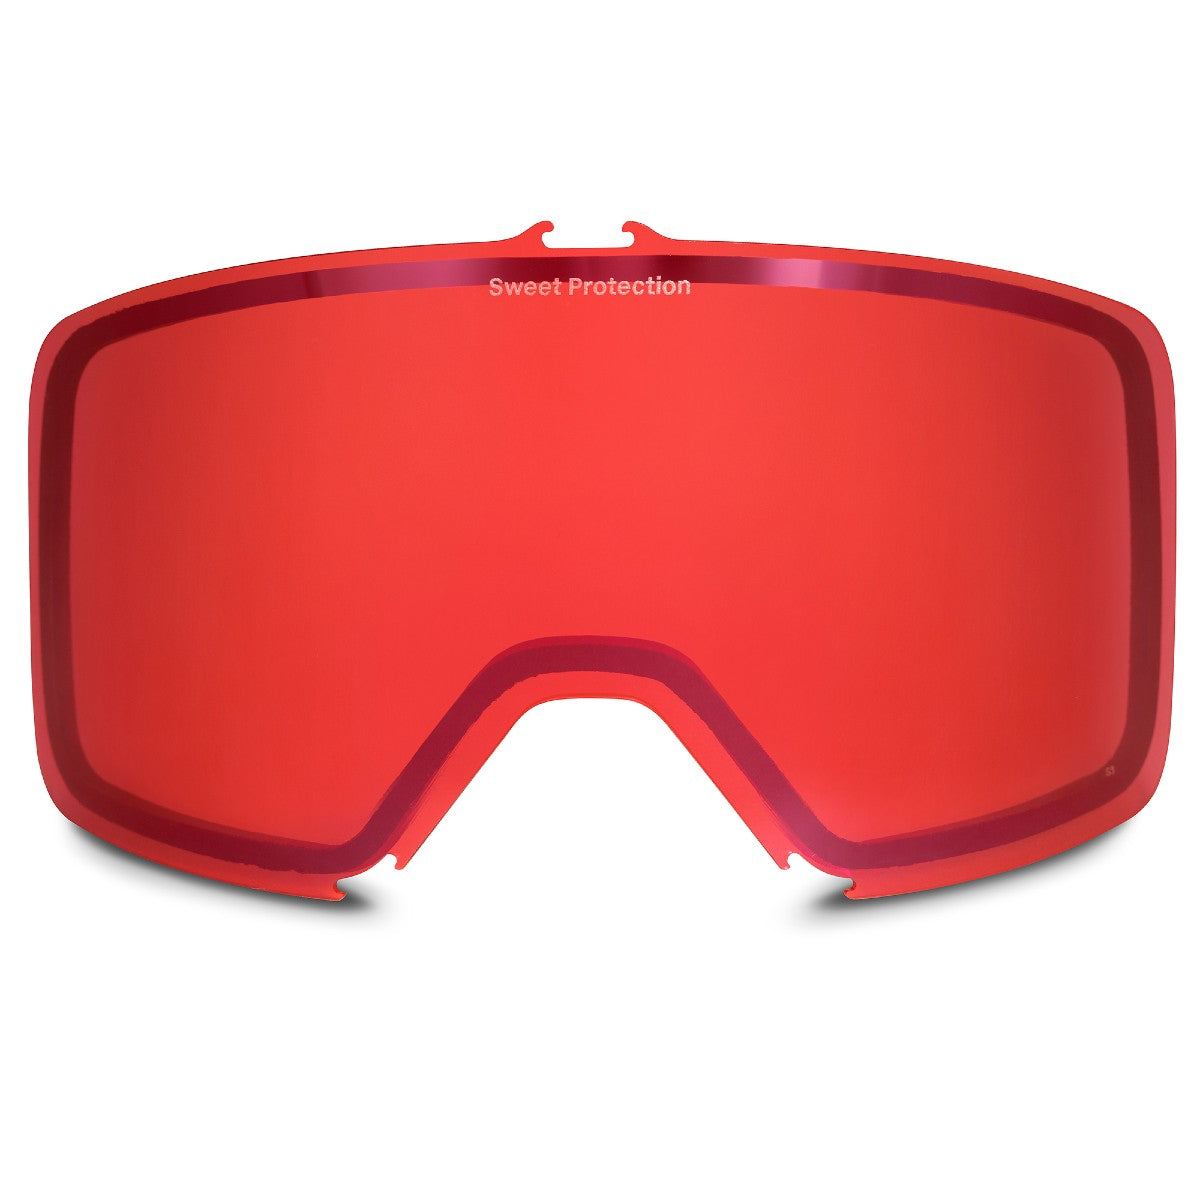 Sweet Protection - Firewall Lens - Satin Ruby